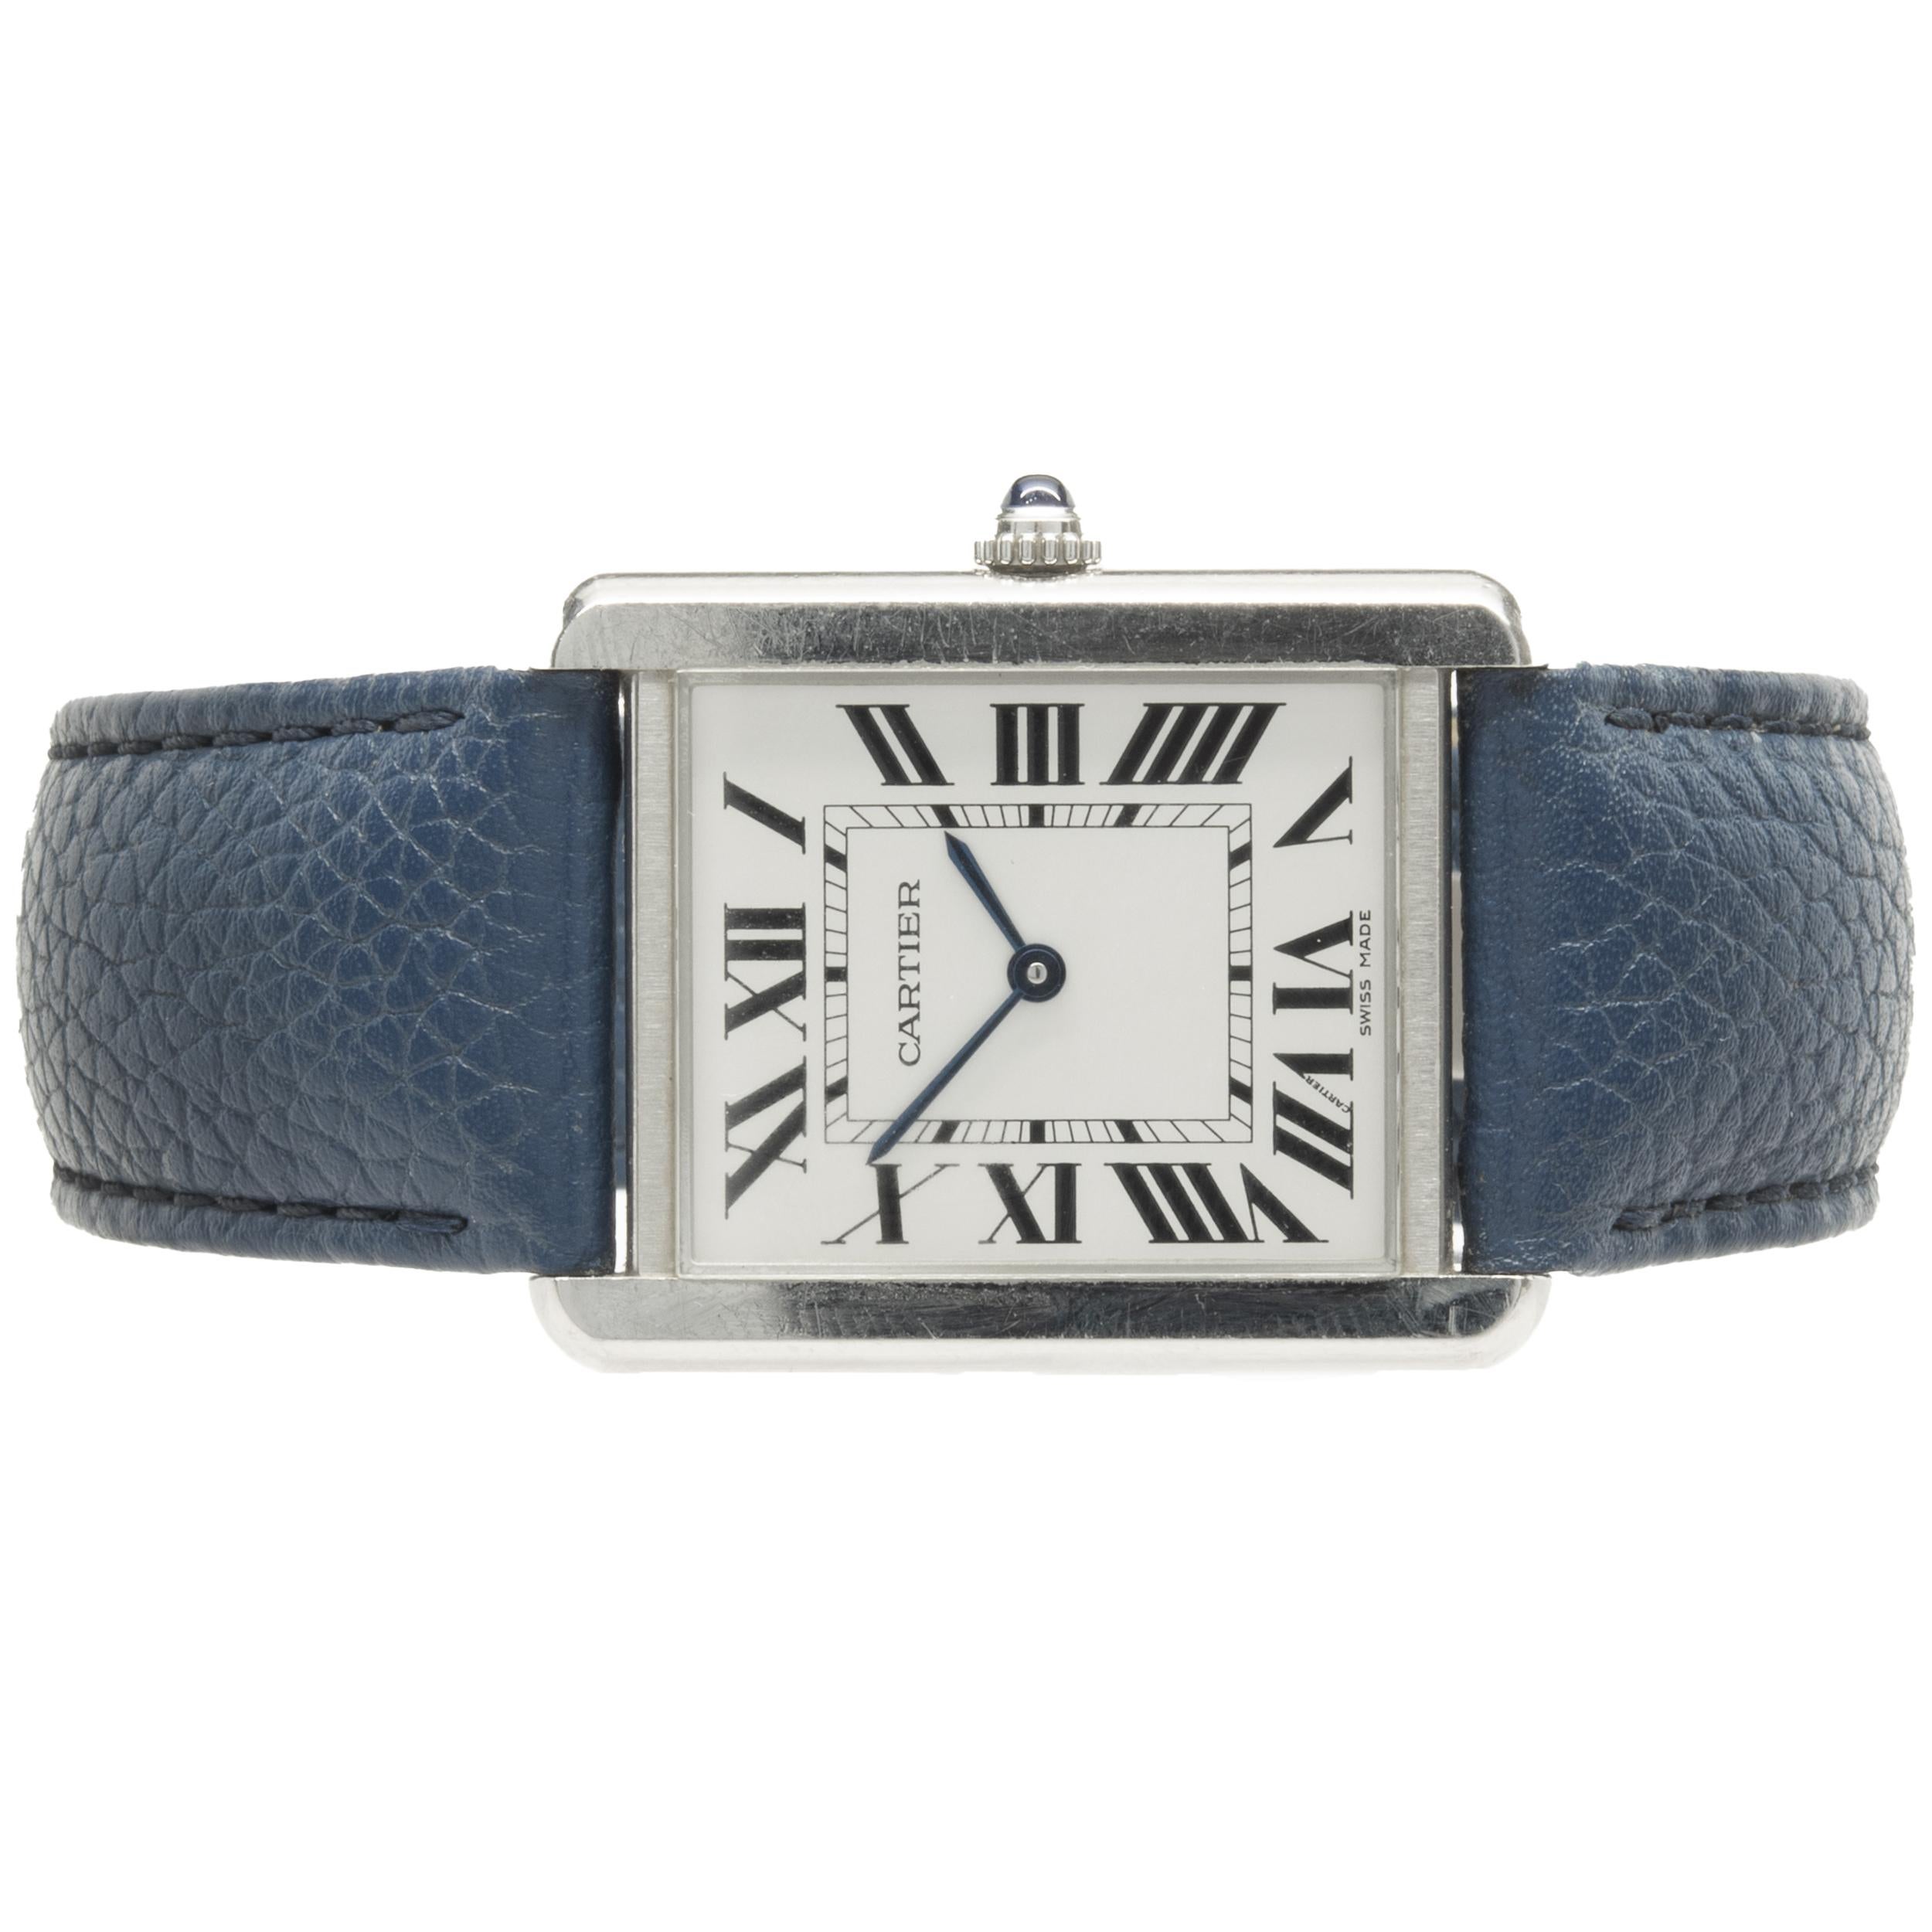 Movement: quartz
Function: hours, minutes
Case: 35 x 27mm stainless steel rectangular case, push pull crown, sapphire crystal
Dial: white roman dial, steel sword sweeping hands
Band: Cartier blue leather strap, fold over clasp
Serial #: